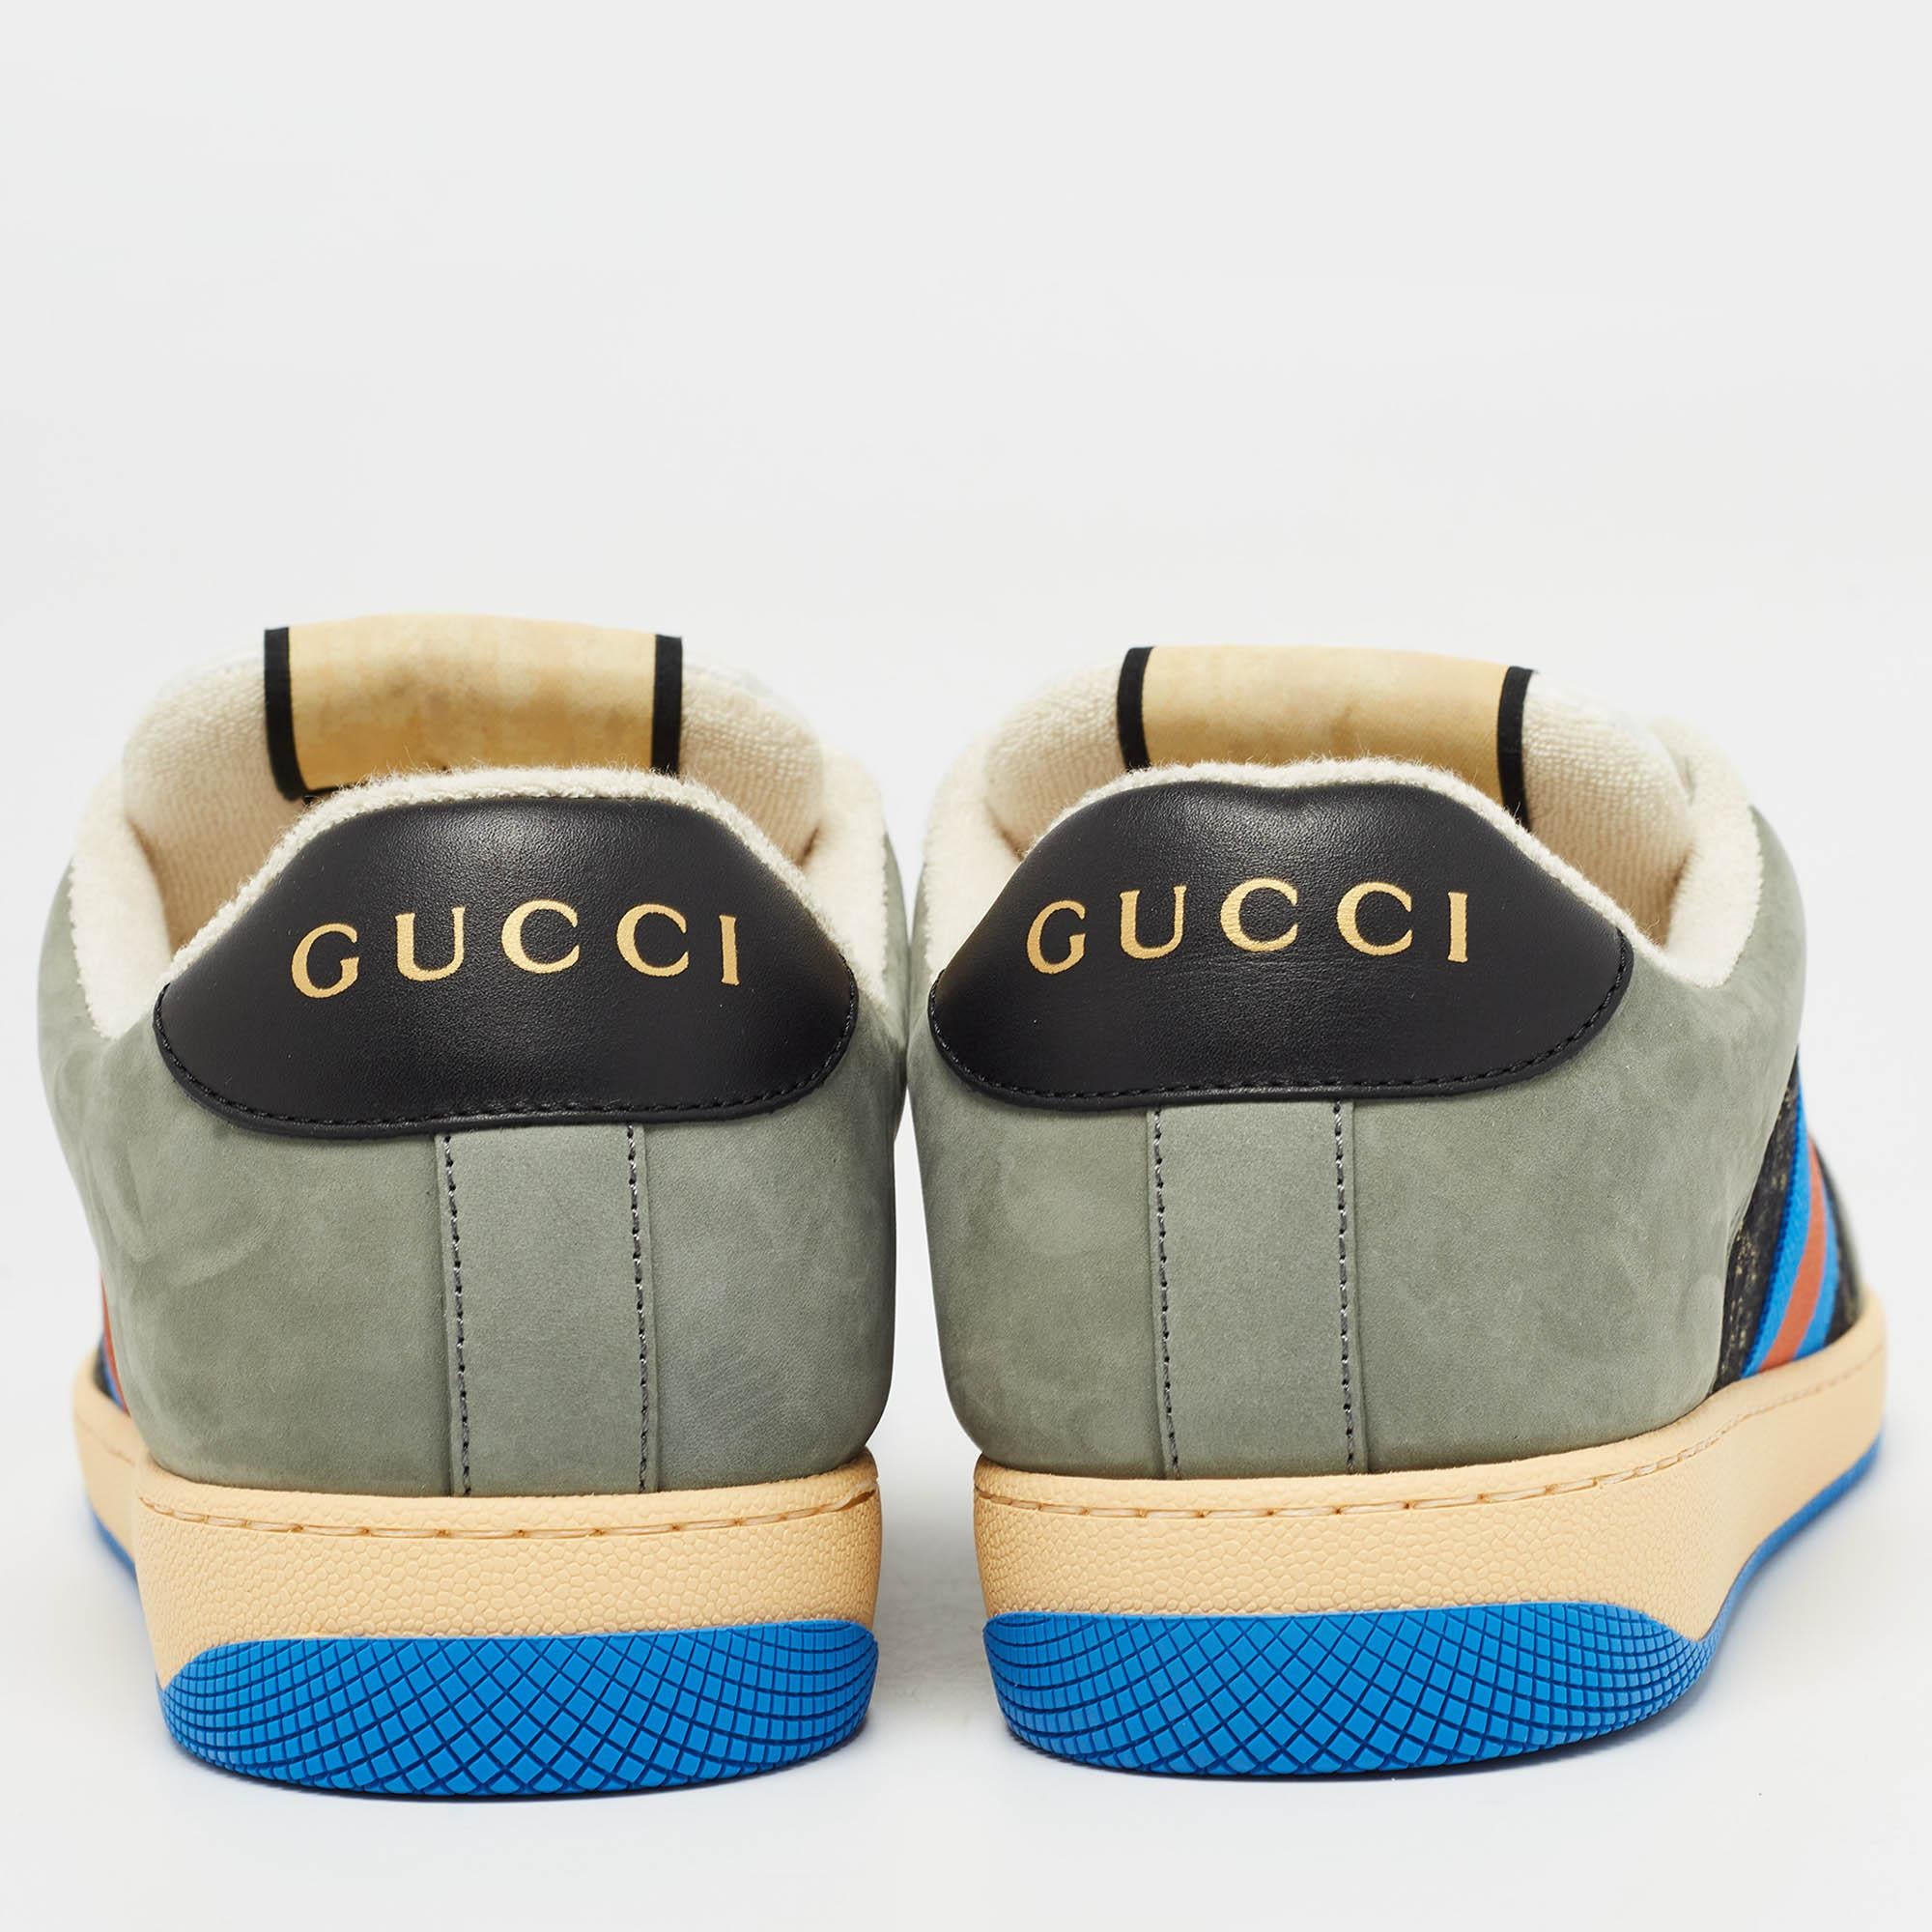 Give your outfit a stylish update with this pair of Gucci Screener sneakers. The creation is sewn perfectly to help you make a statement in them for a long time.

Includes: Original Dustbag, Original Box, Extra Laces, Info Booklet